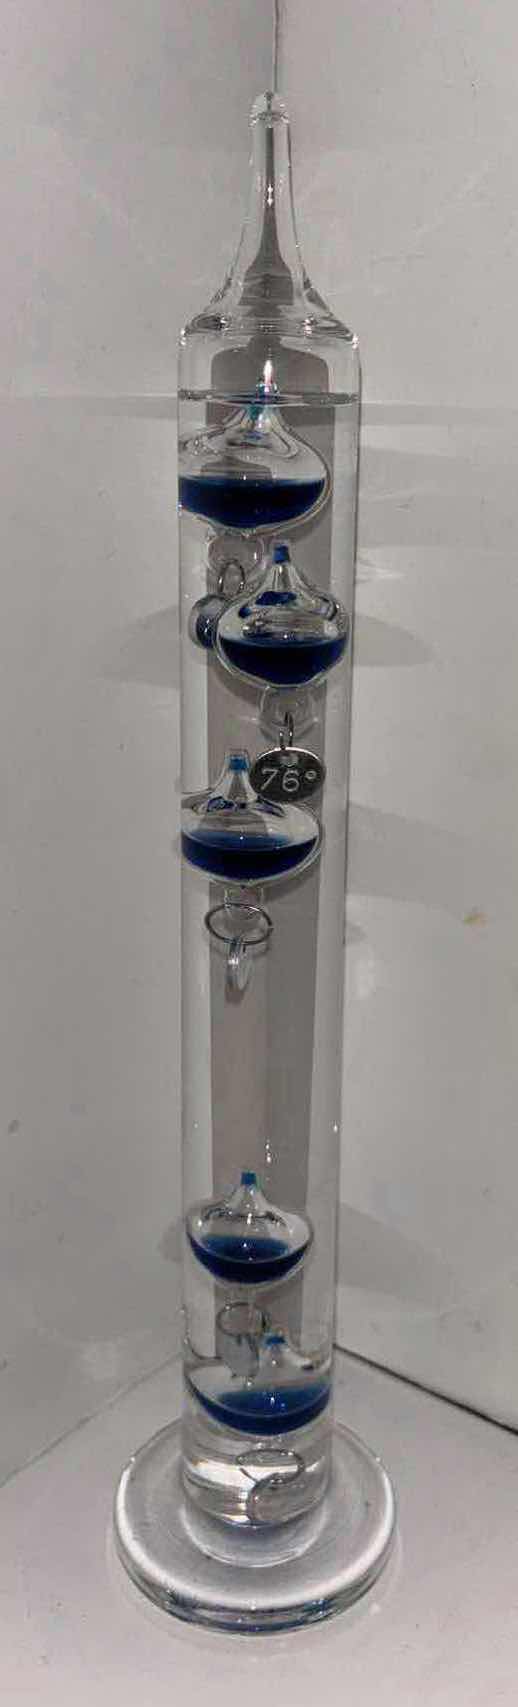 Photo 3 of GALILEO GLASS THERMOMETERS W FLOATING GLOBES (TALLEST 13.25”)